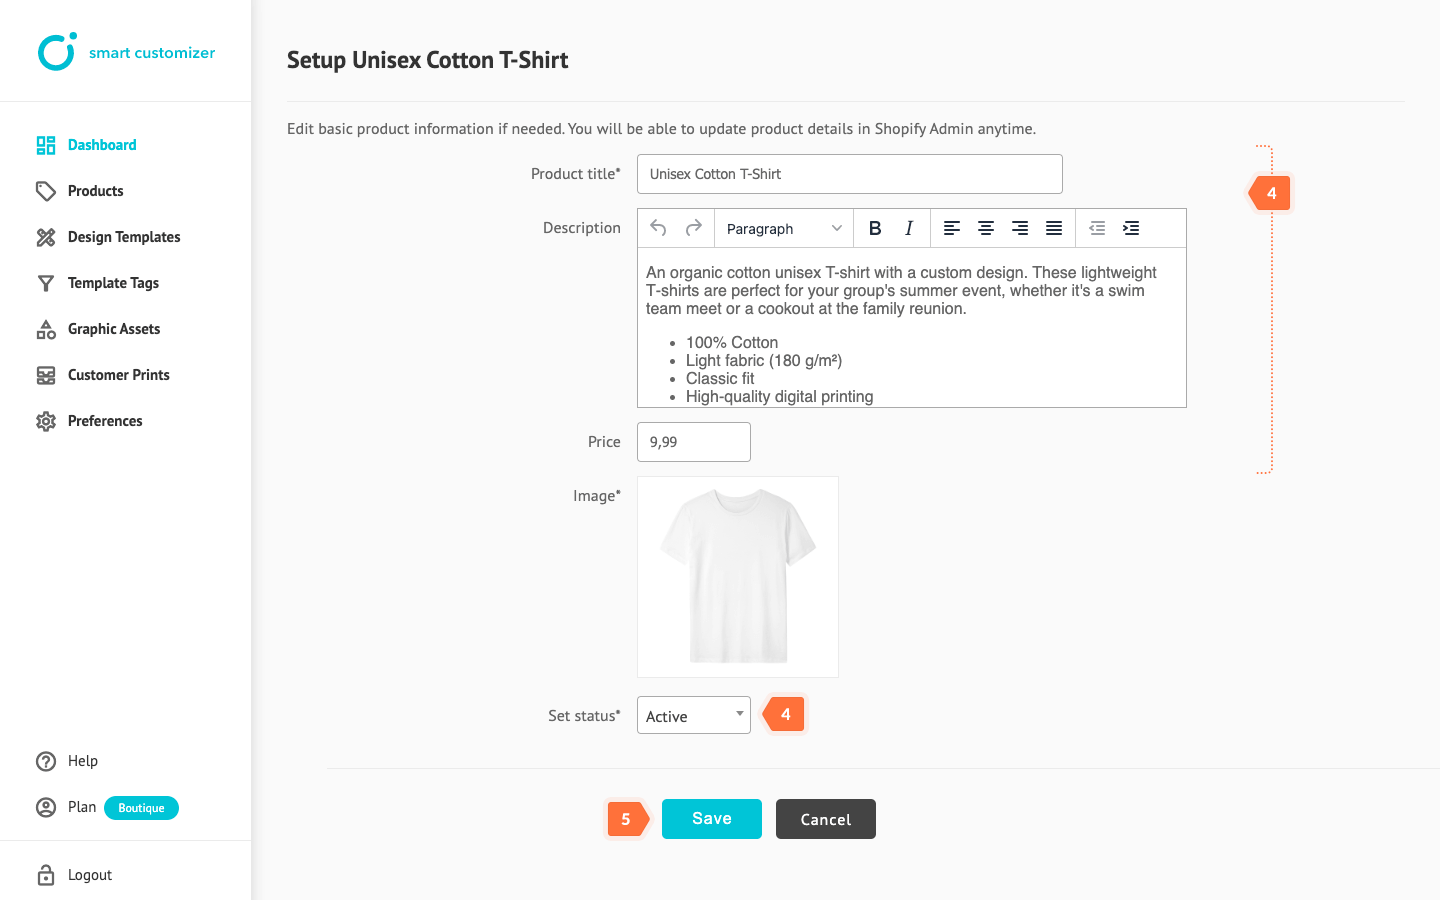 Save and publish your new customizable product